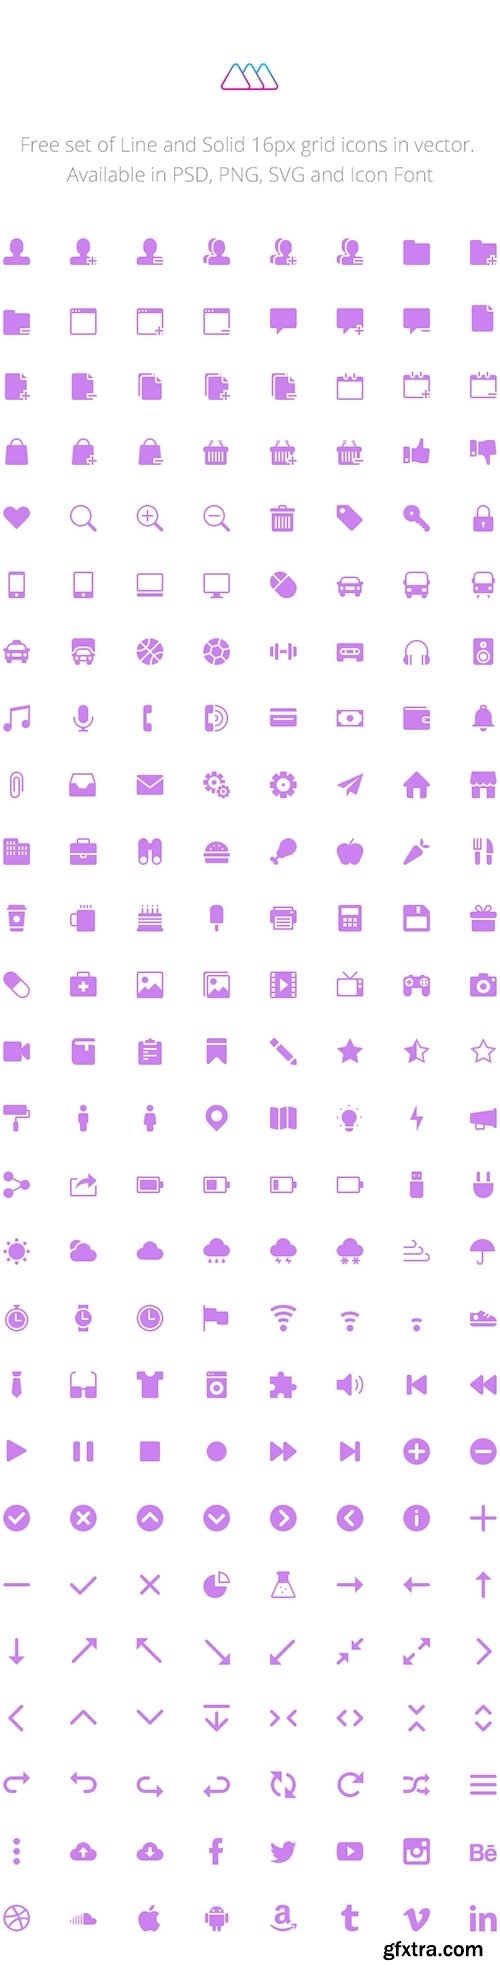 210 Solid Web Icons, PSD, PNG, SVG, Icon Font